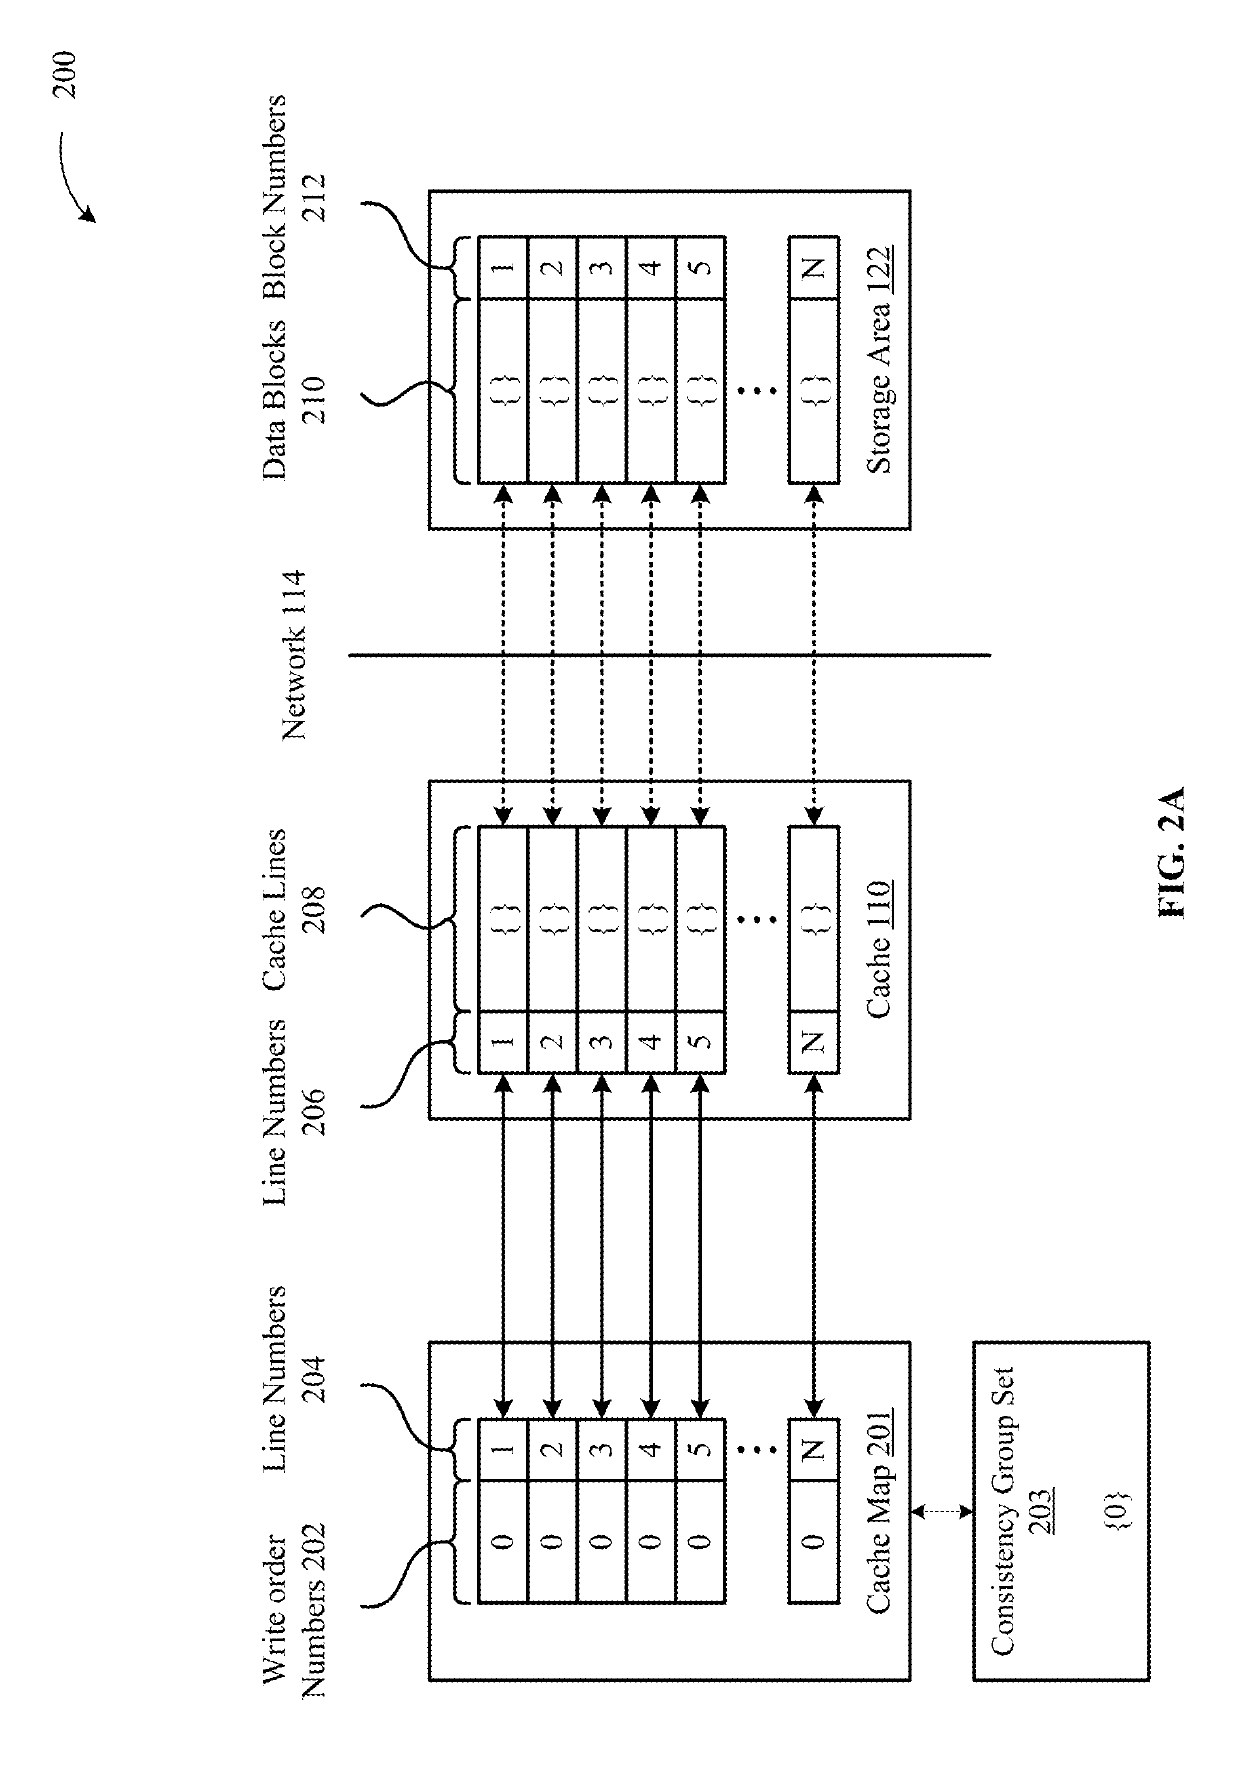 Process for maintaining data write ordering through a cache